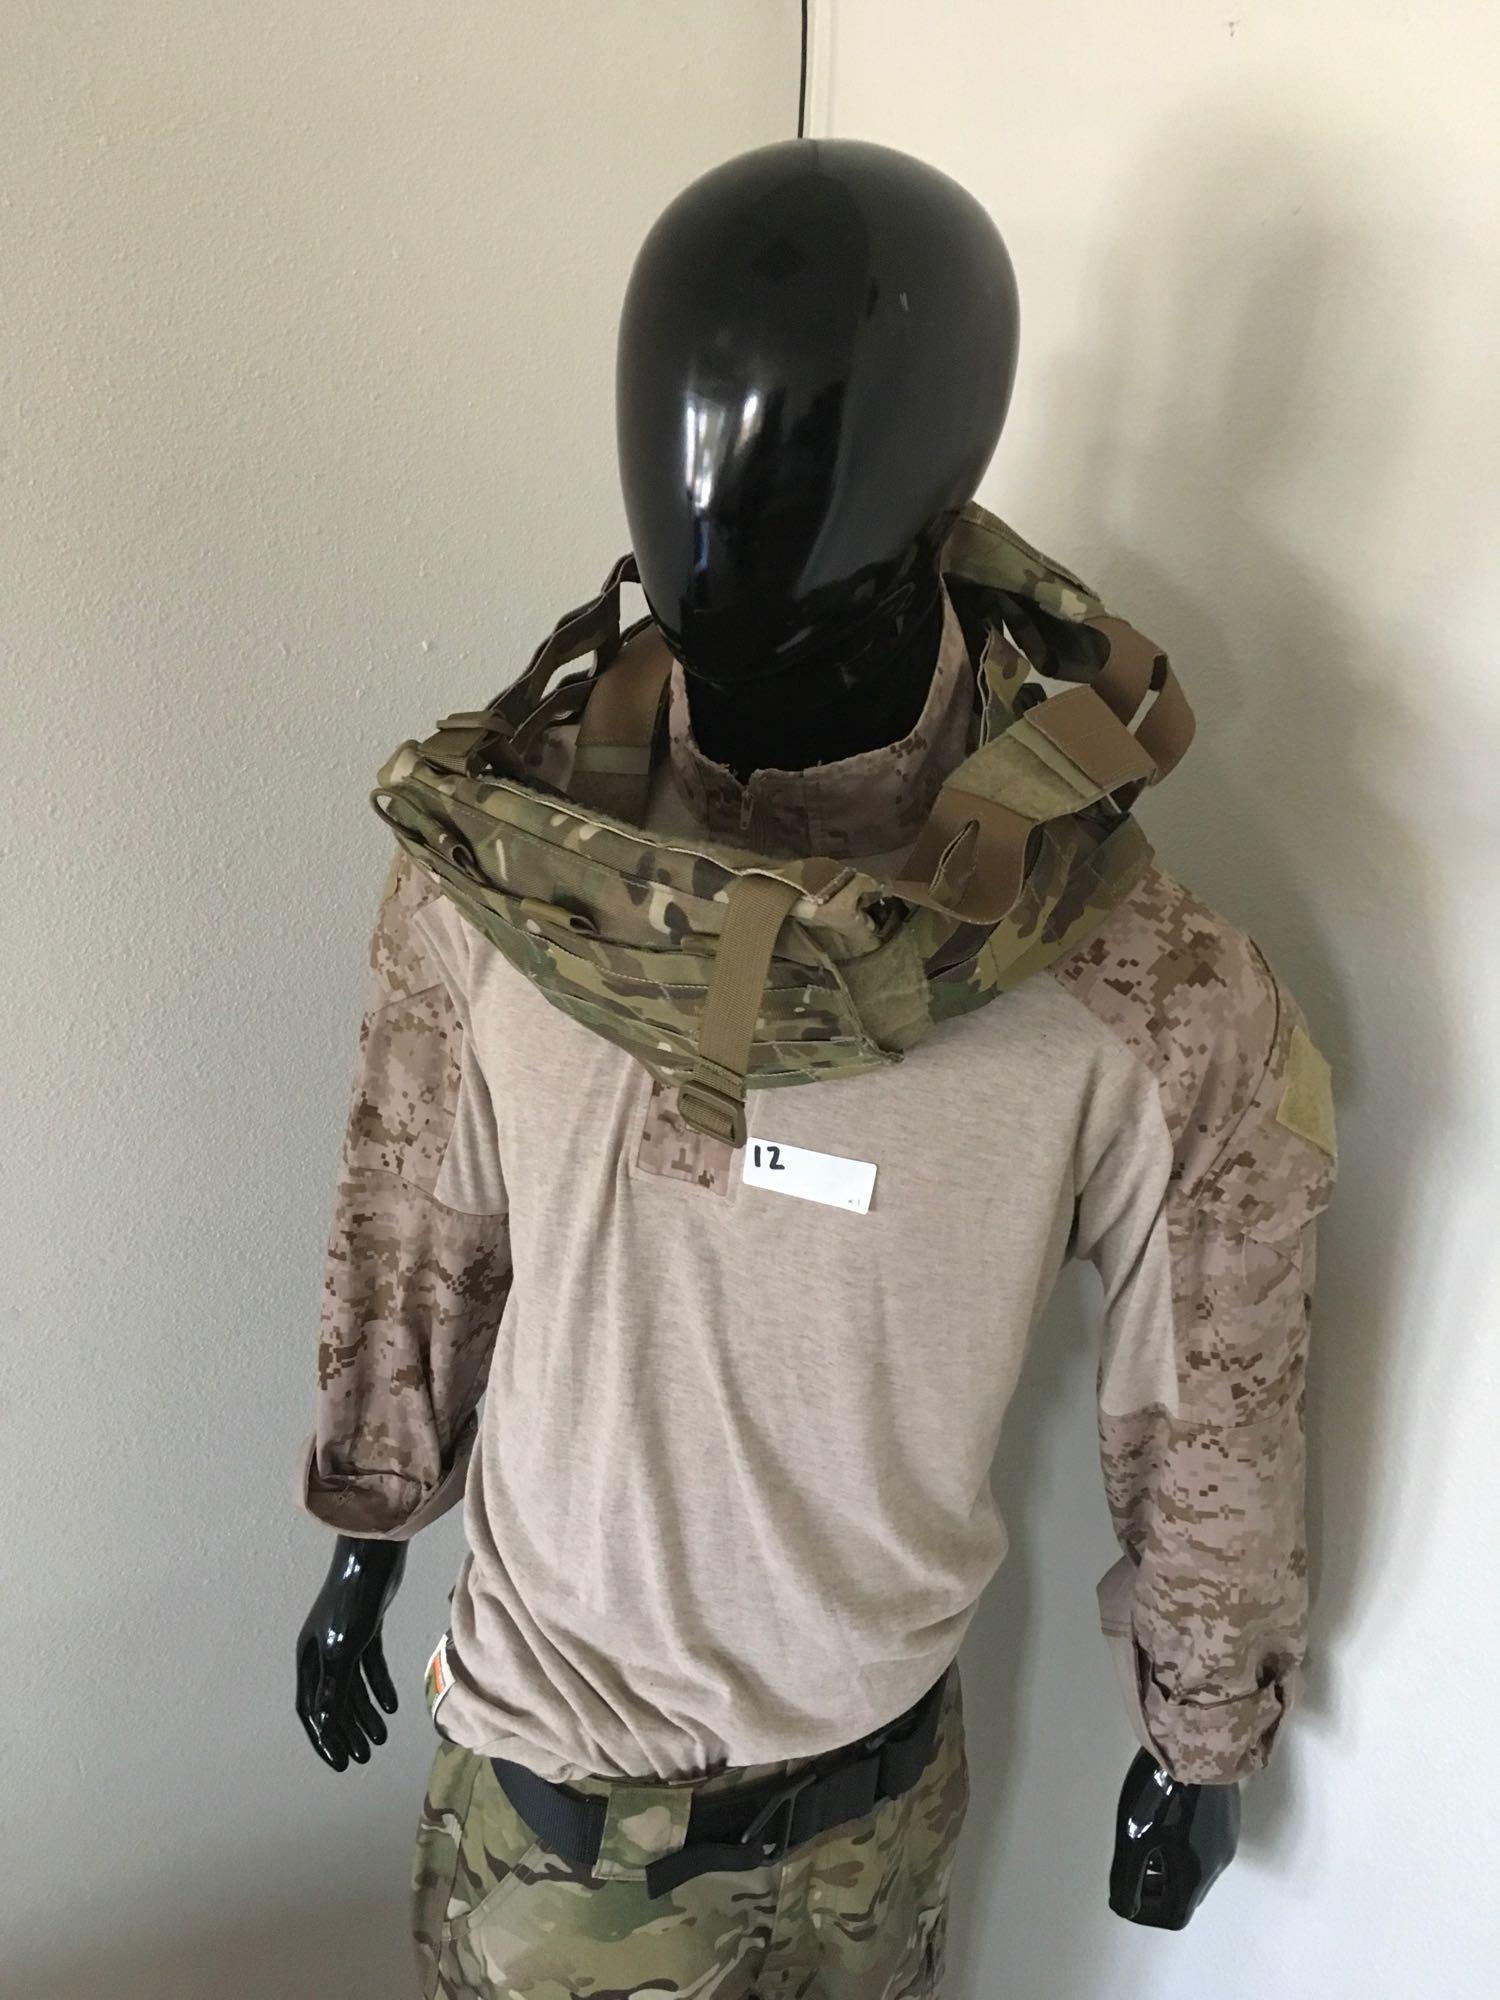 Life size/ Full-size Mannequin with gear